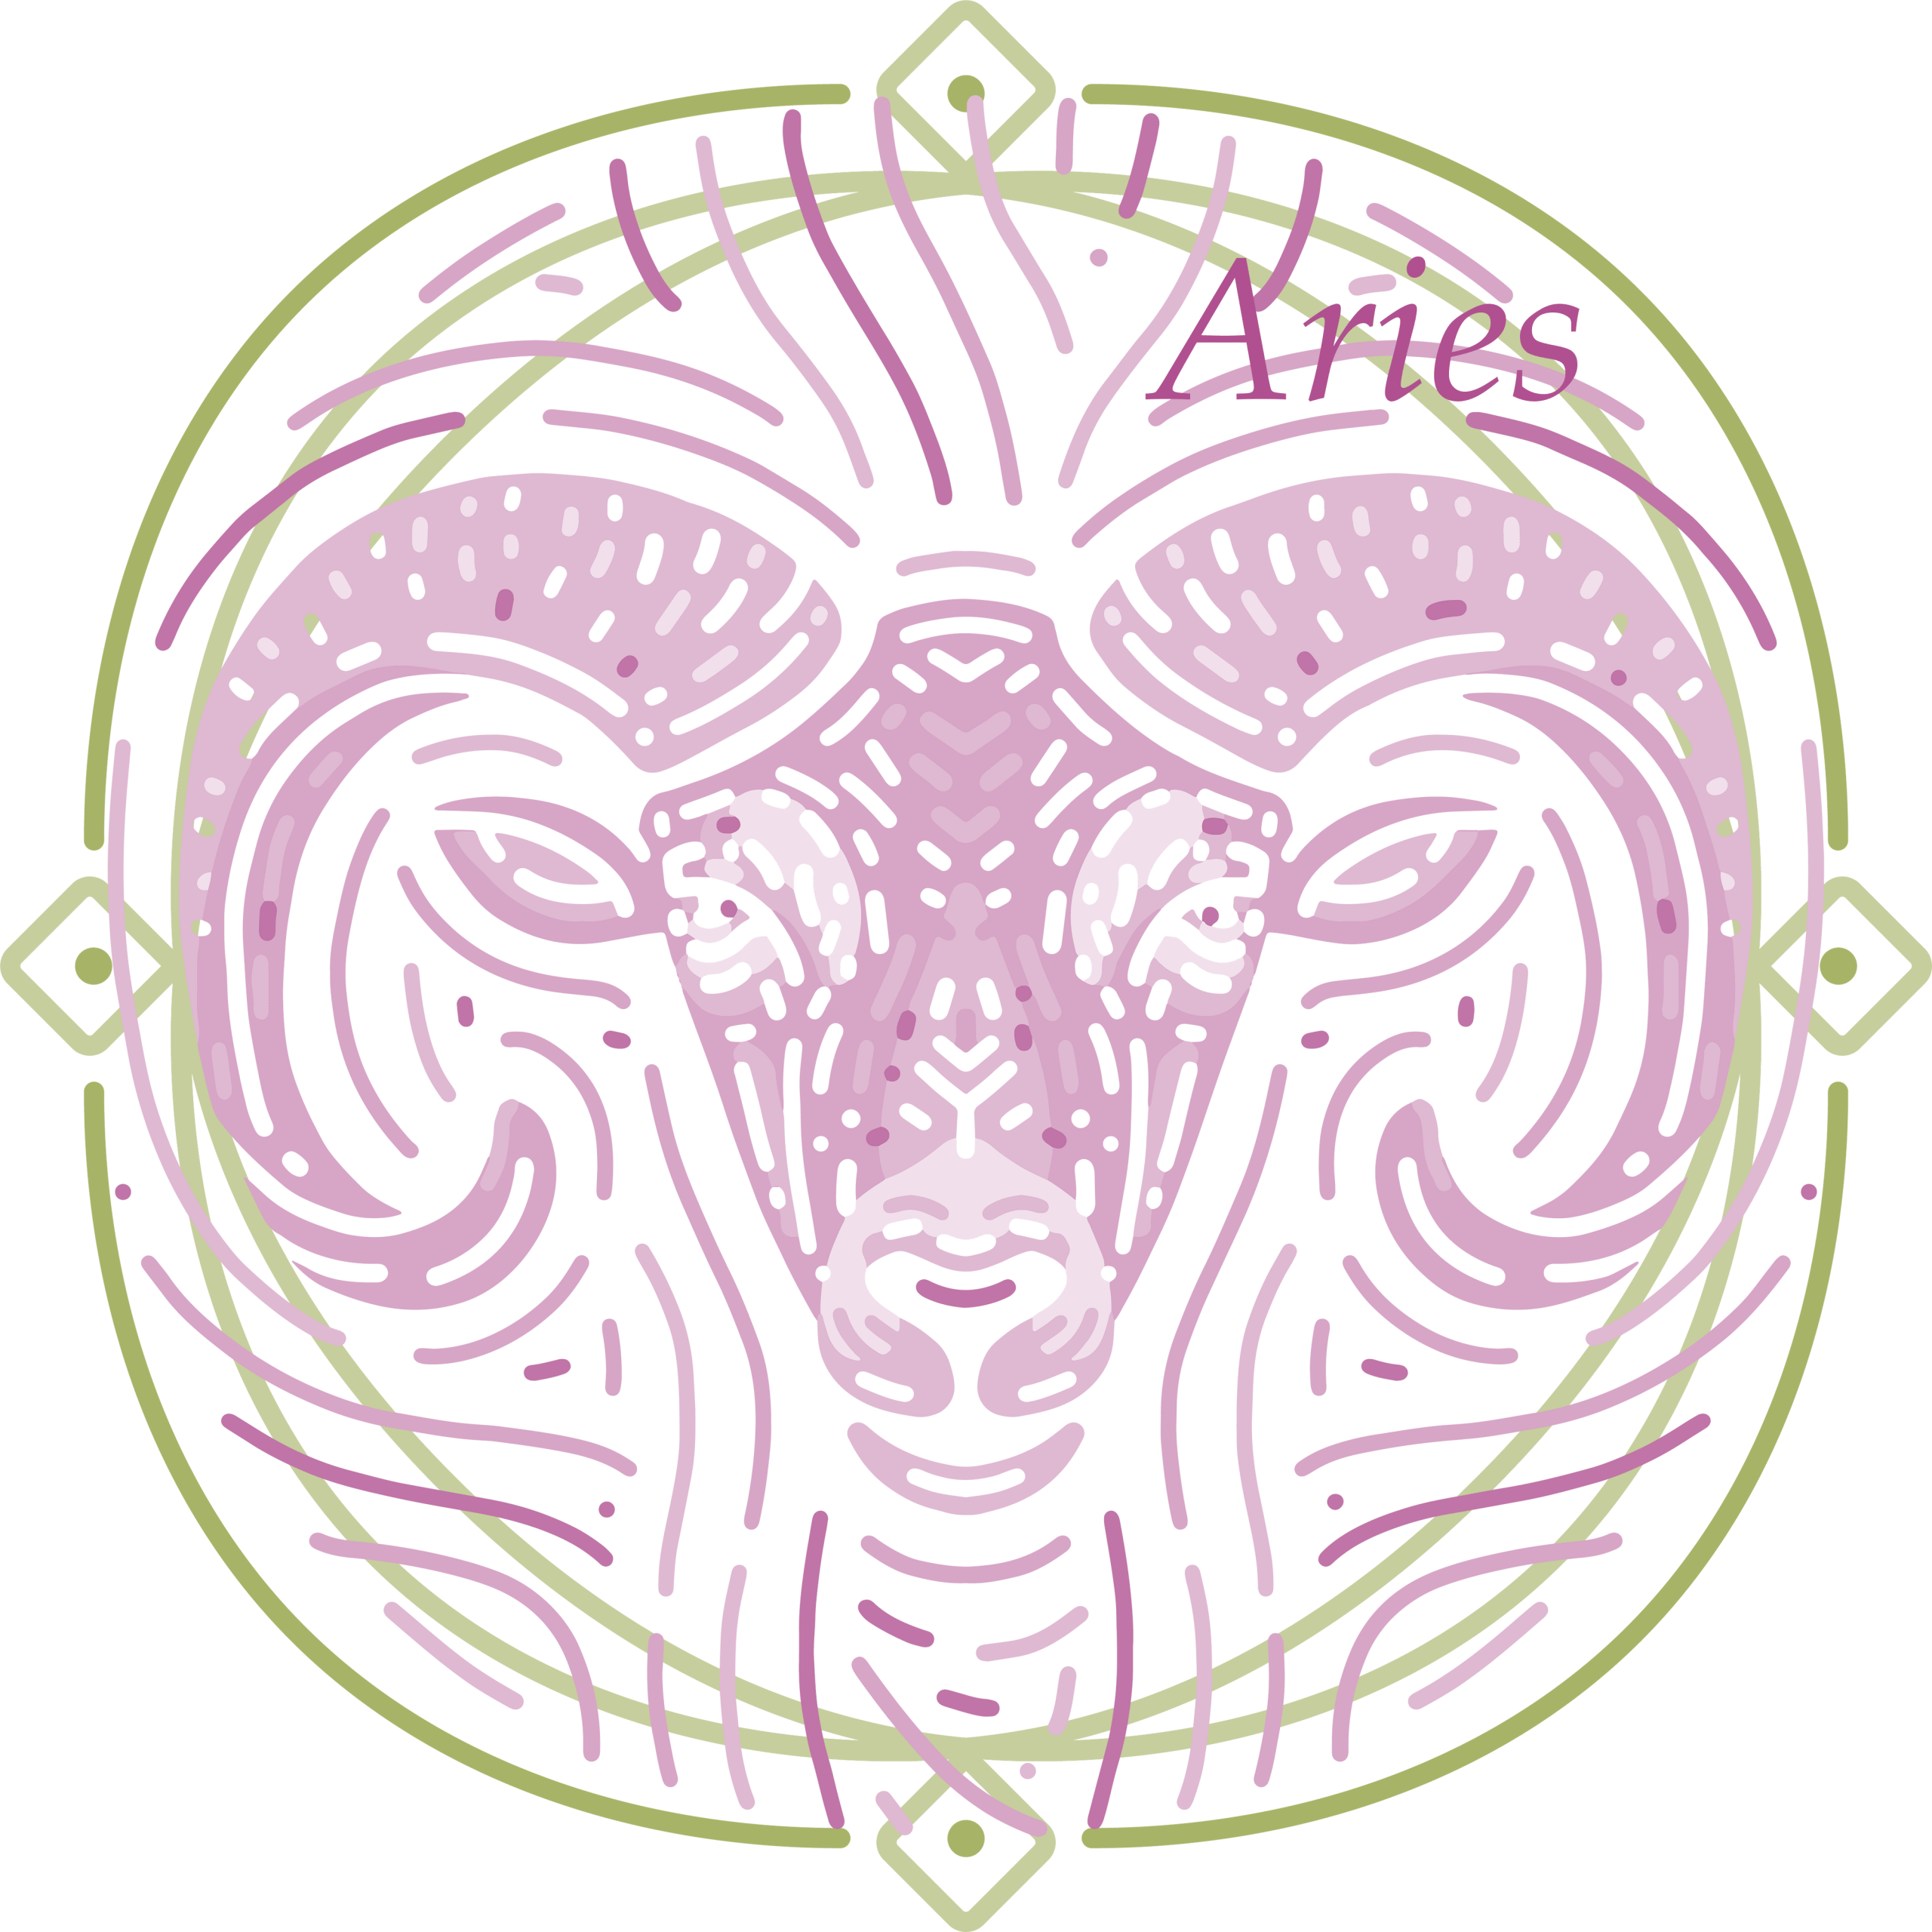 A Ram's Head as the symbol of the Aries sign